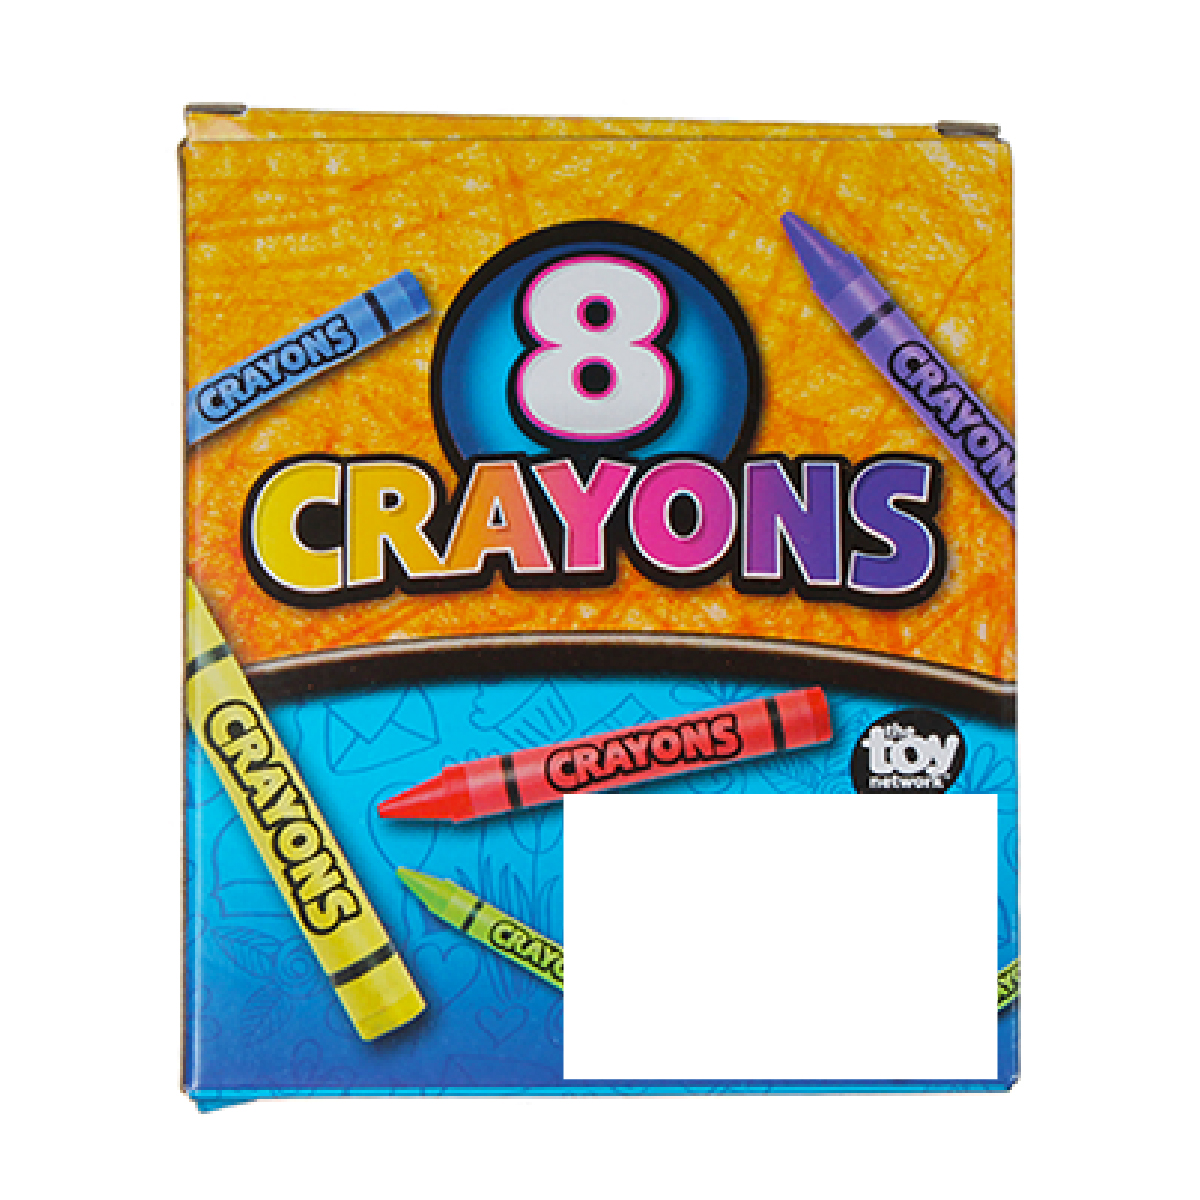 Full Color Decal 8 Pack Crayons